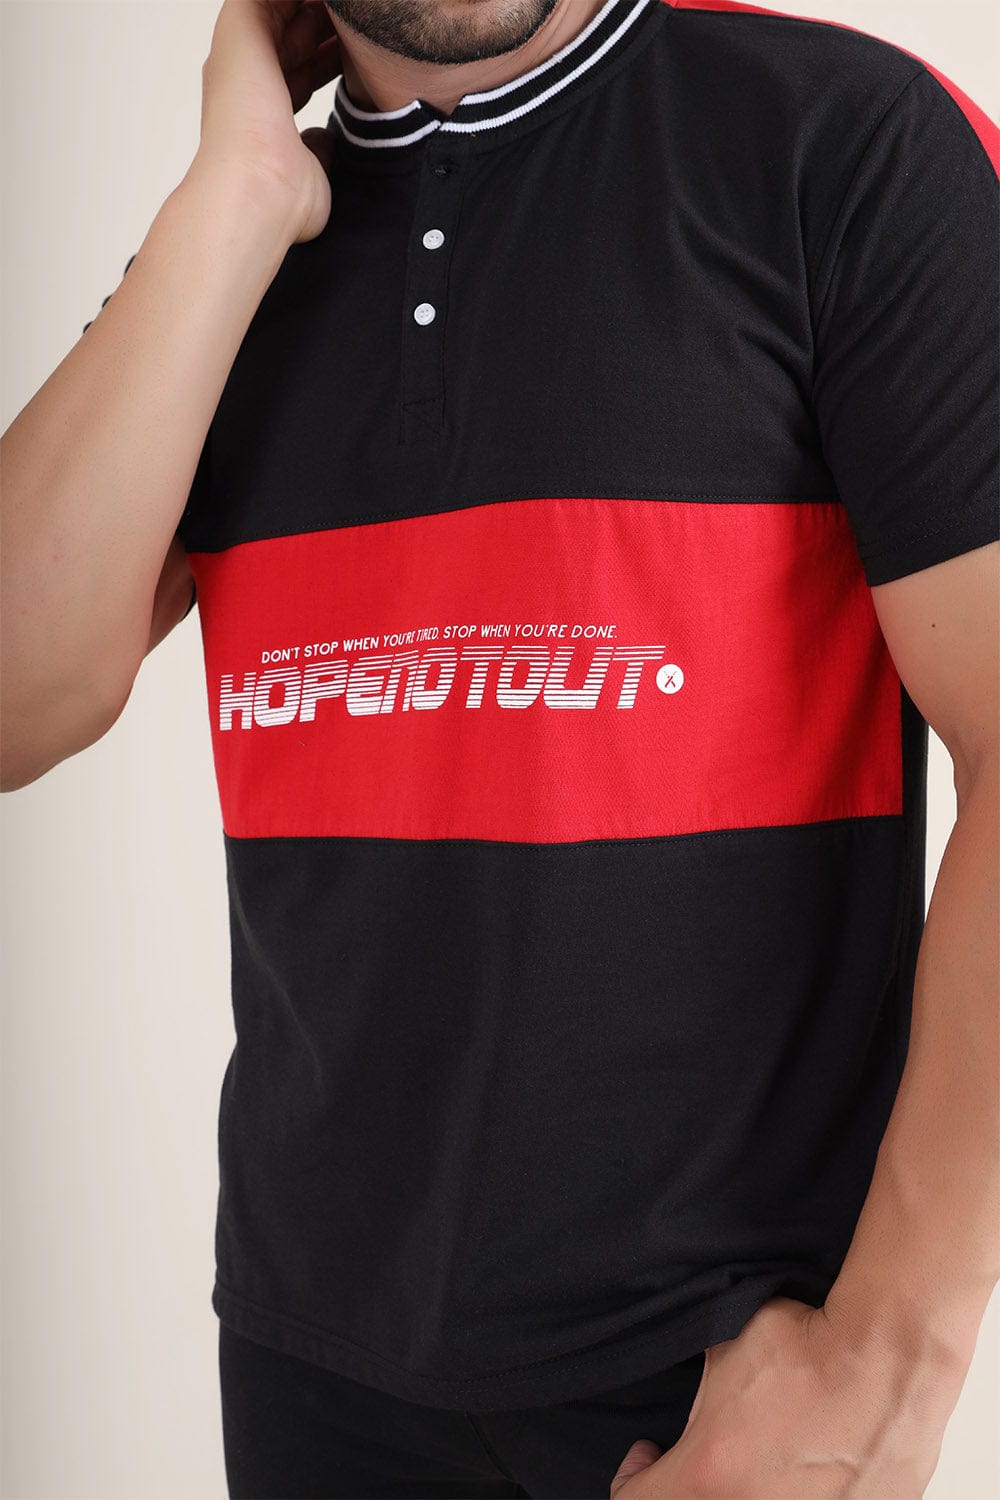 Hope Not Out by Shahid Afridi Men Polo Shirt Red and Black Printed Shirt